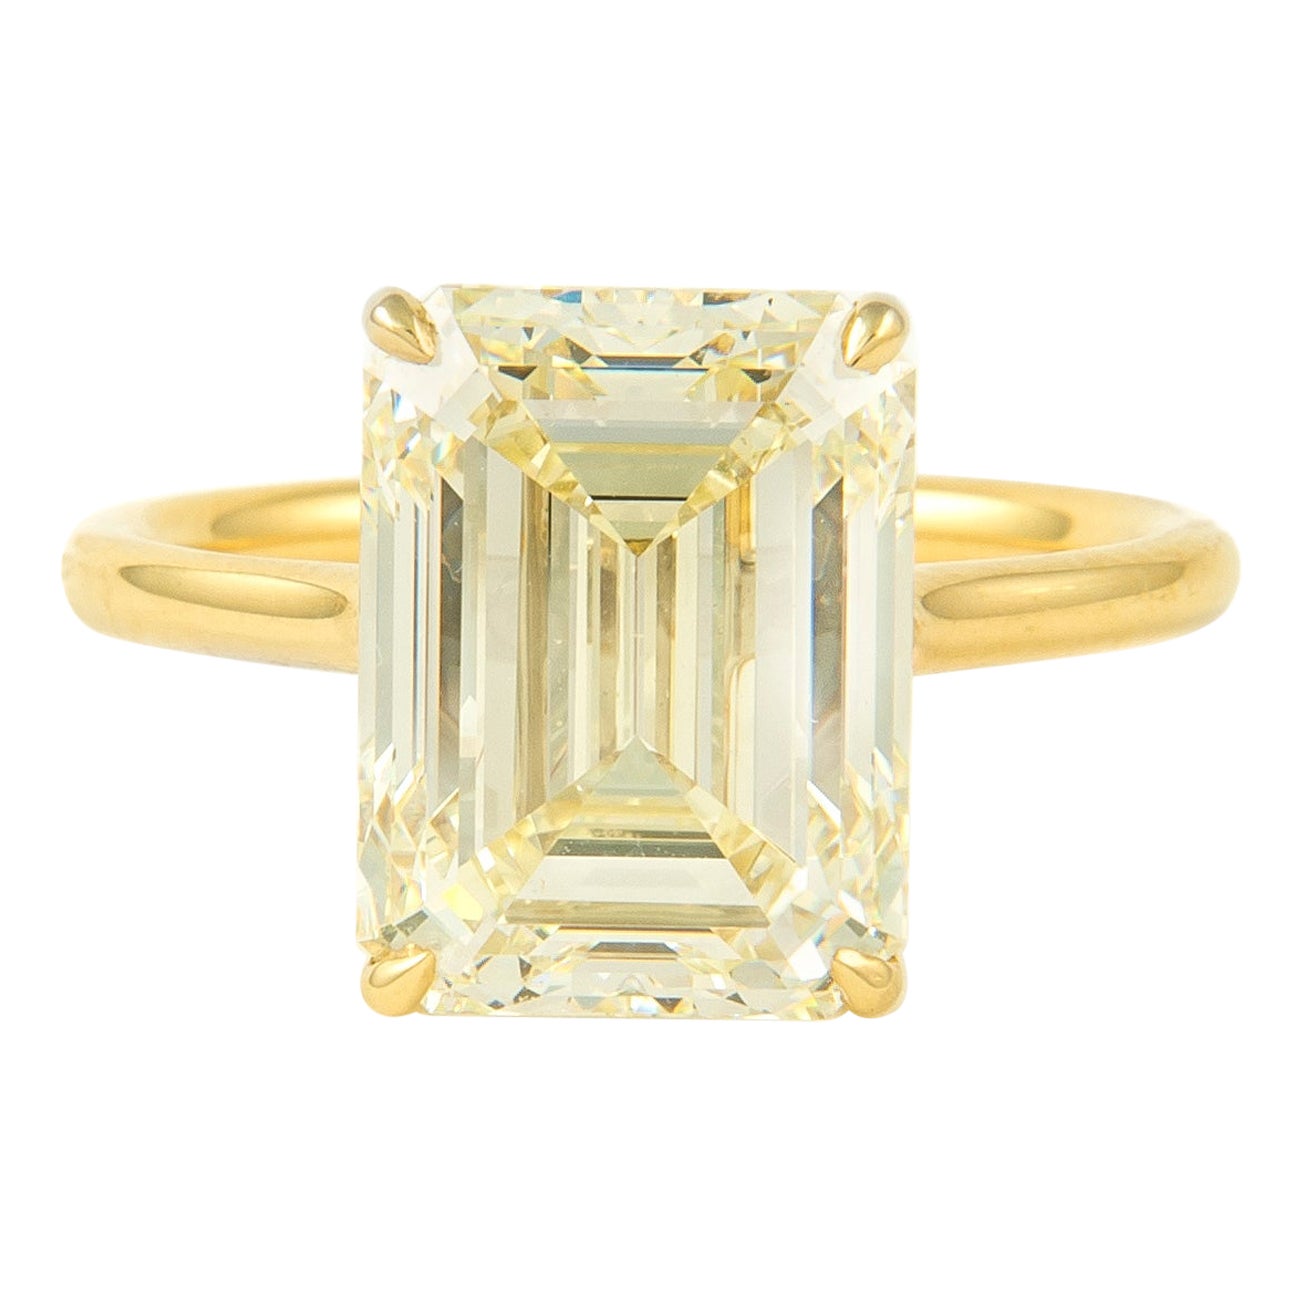 Alexander HRD 6.02 Carat Emerald Cut Diamond Solitaire Ring 18k Yellow Gold For Sale